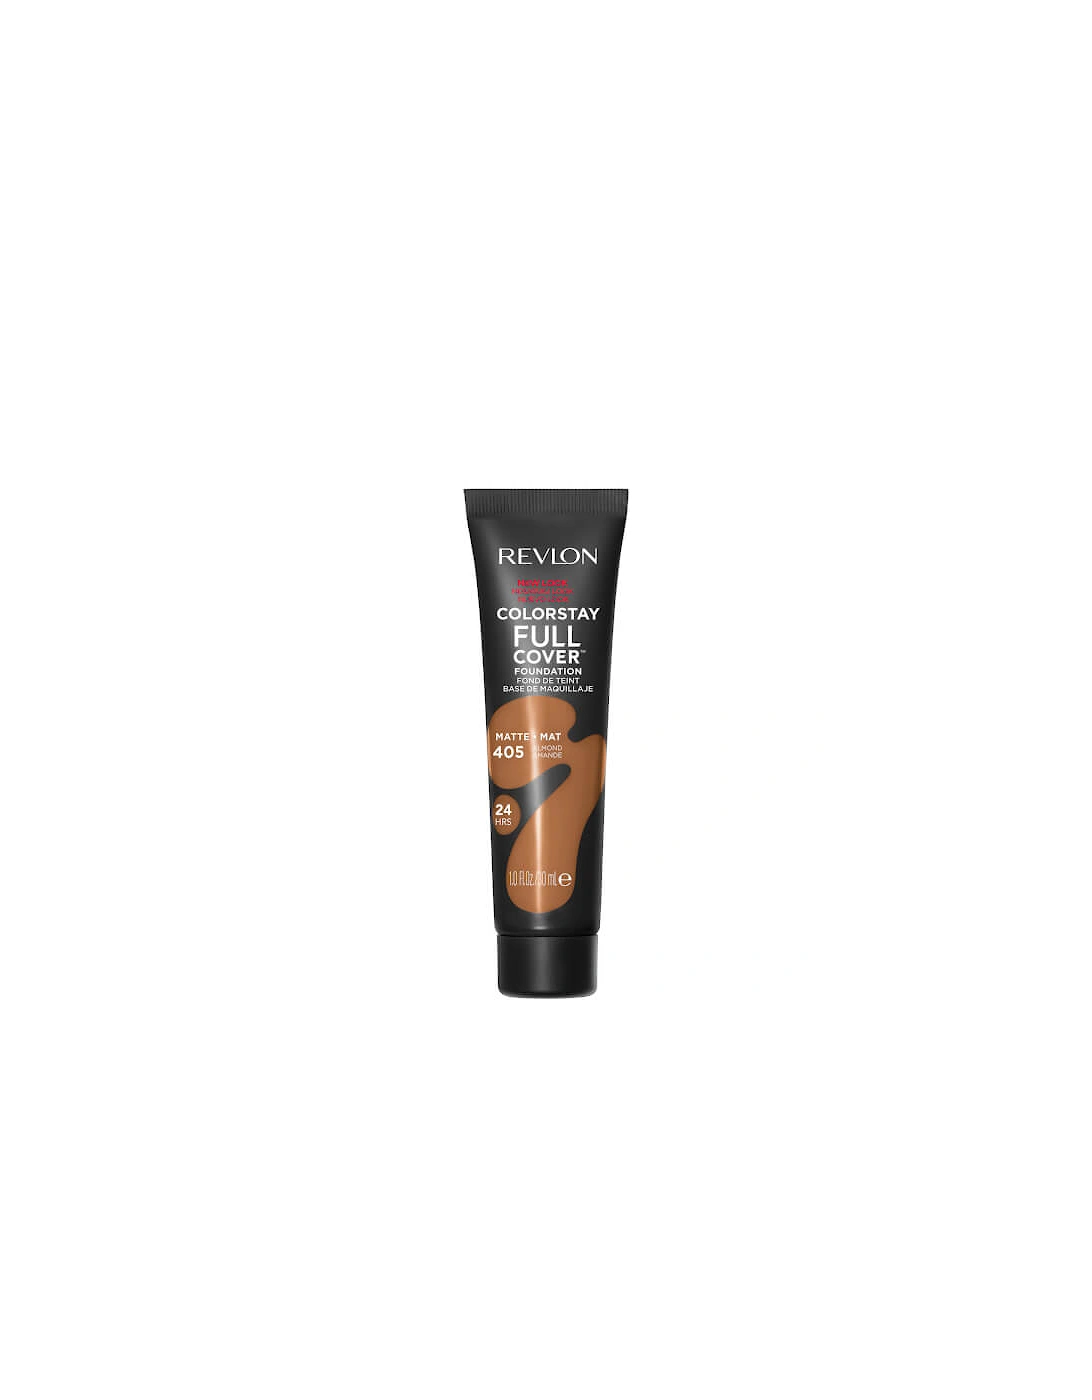 ColorStay Full Cover Foundation 405, 2 of 1